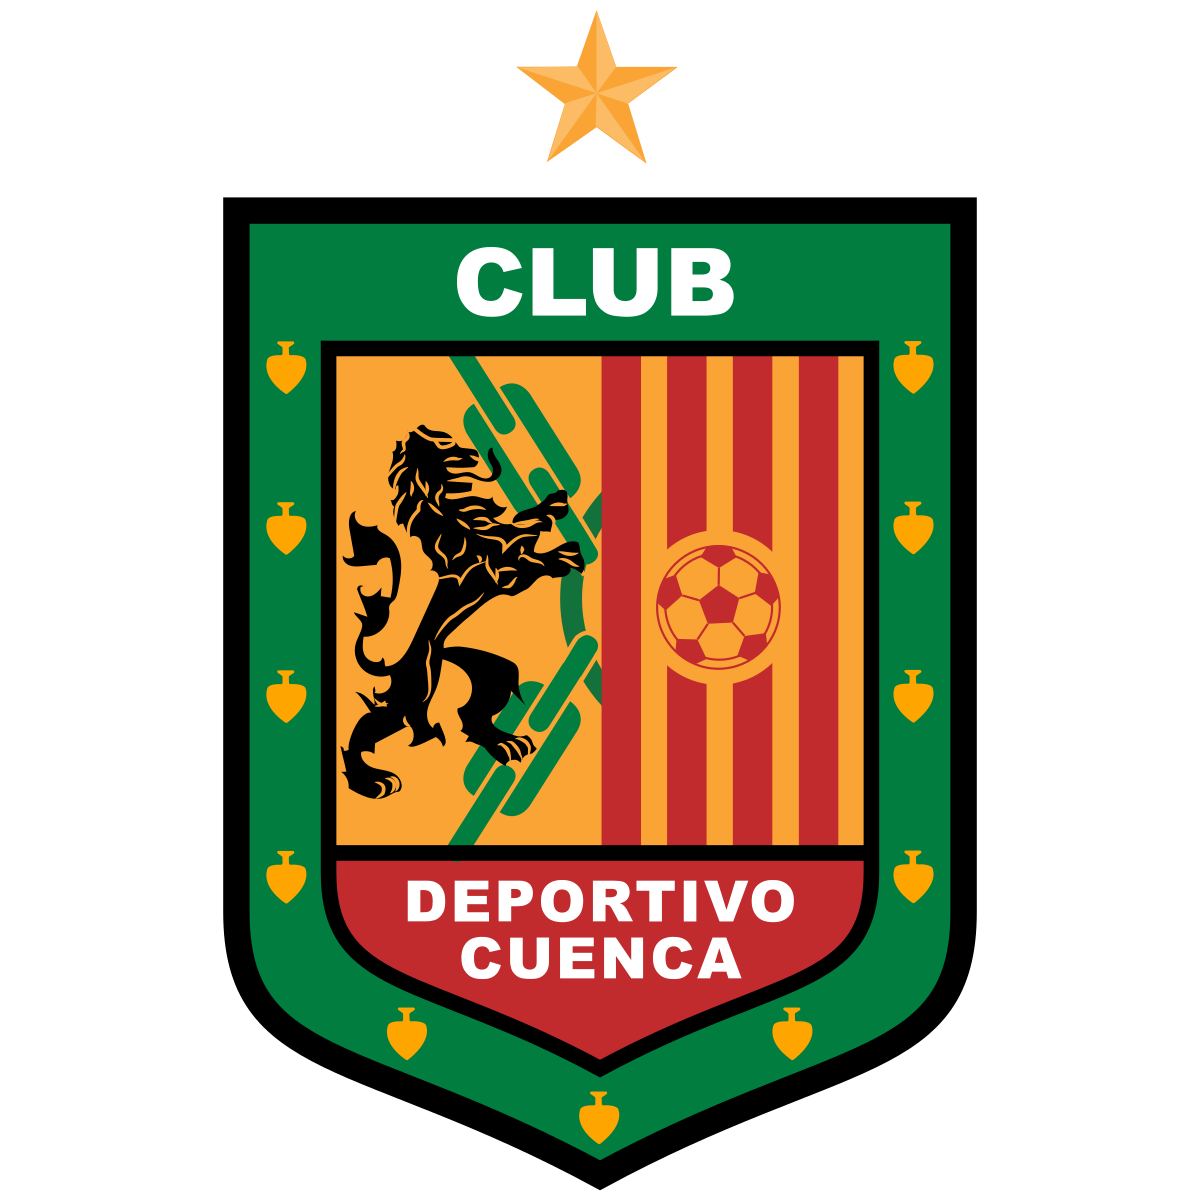 Deportivo Cuenca fútbol players to make up to $8,000 per month